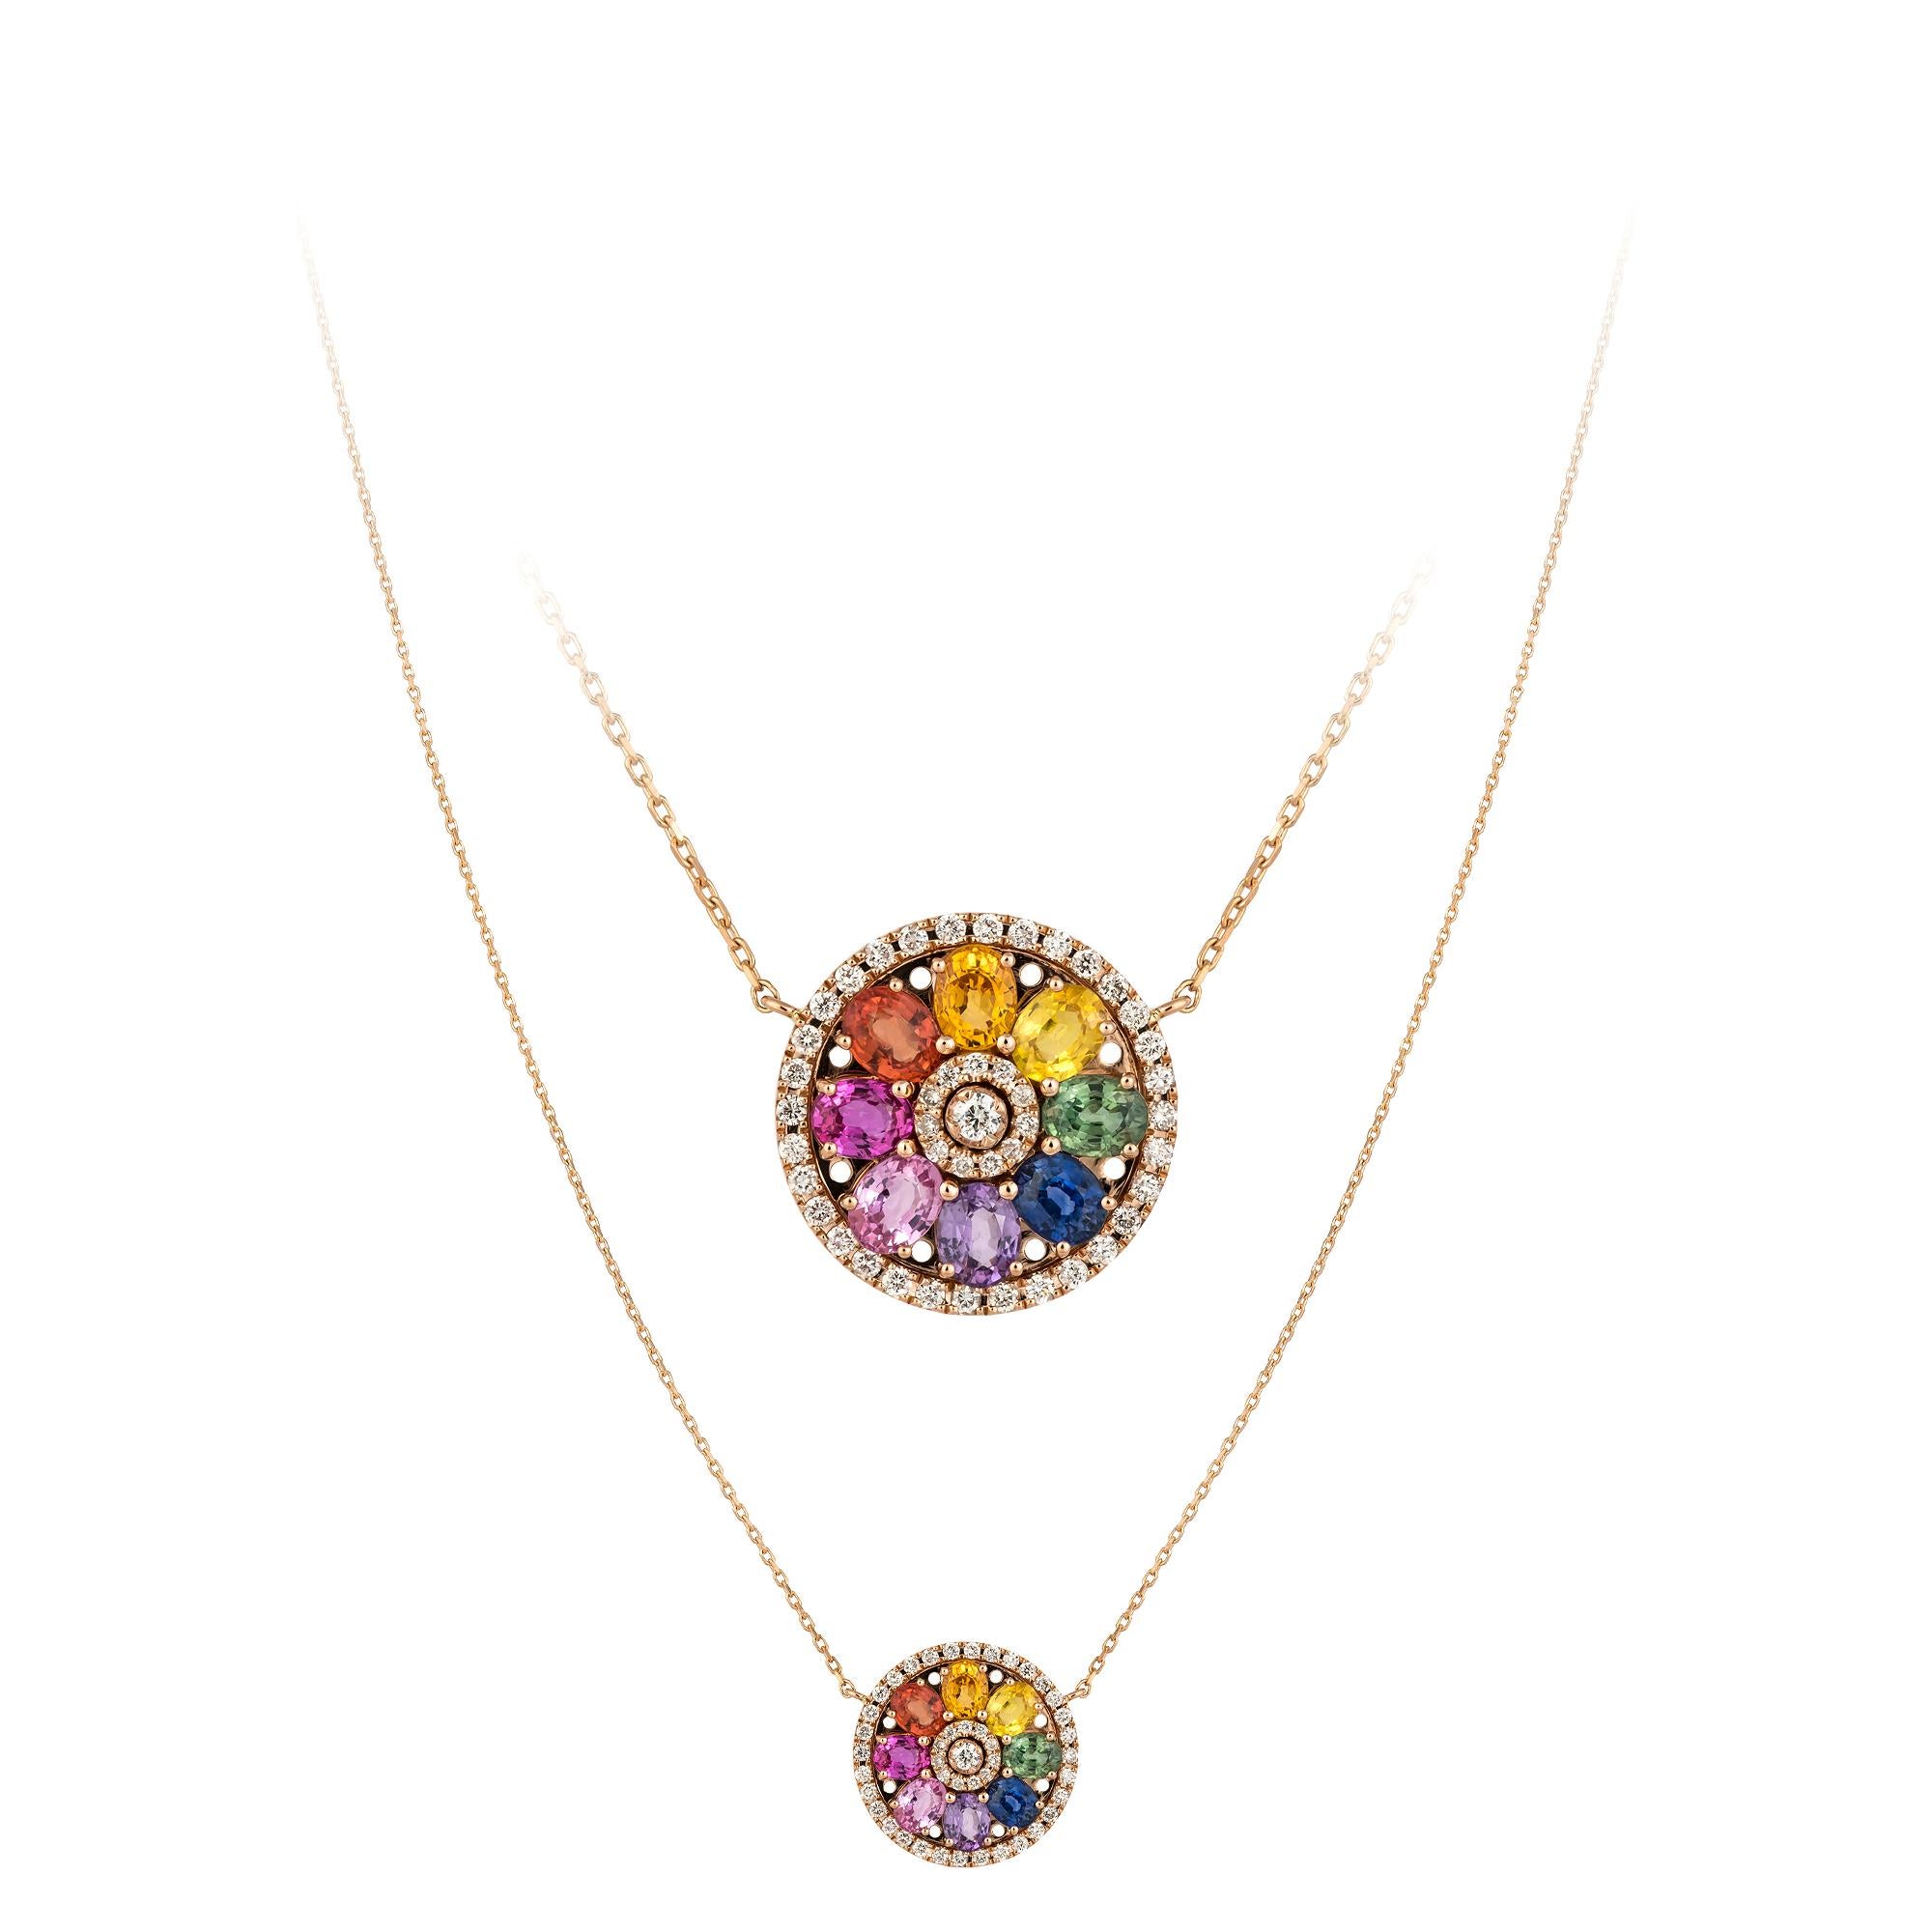 NECKLACE 18K Rose Gold 

Diamond 0.39 Cts/44 Pcs
Multi Sapphire 1.65 Cts/5 PCs
PP 0.32 Cts/1 Pcs
Ruby Gold 0.28 Cts/1 Pcs
BS 0.32 Cts/1 Pcs

With a heritage of ancient fine Swiss jewelry traditions, NATKINA is a Geneva based jewellery brand, which